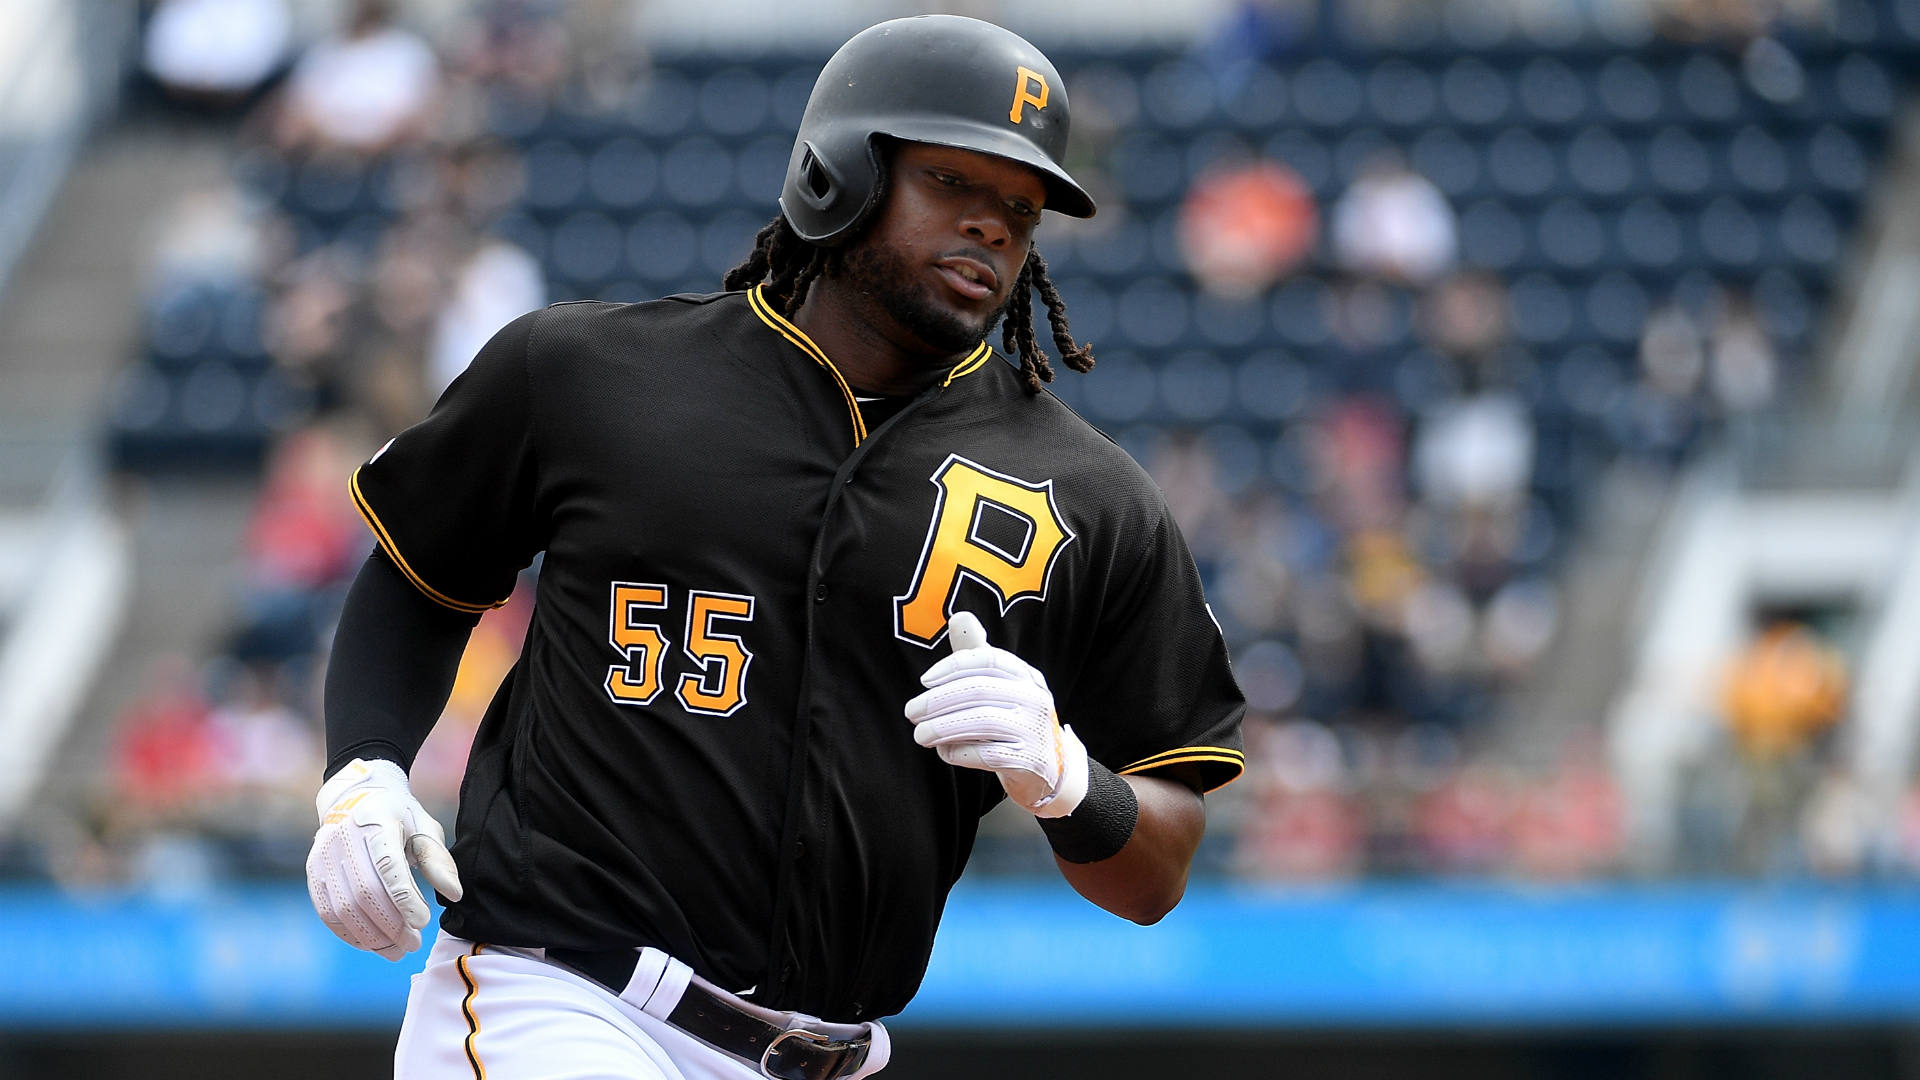 Pirates trade Josh Bell to Nationals; first baseman 'thrilled' to play